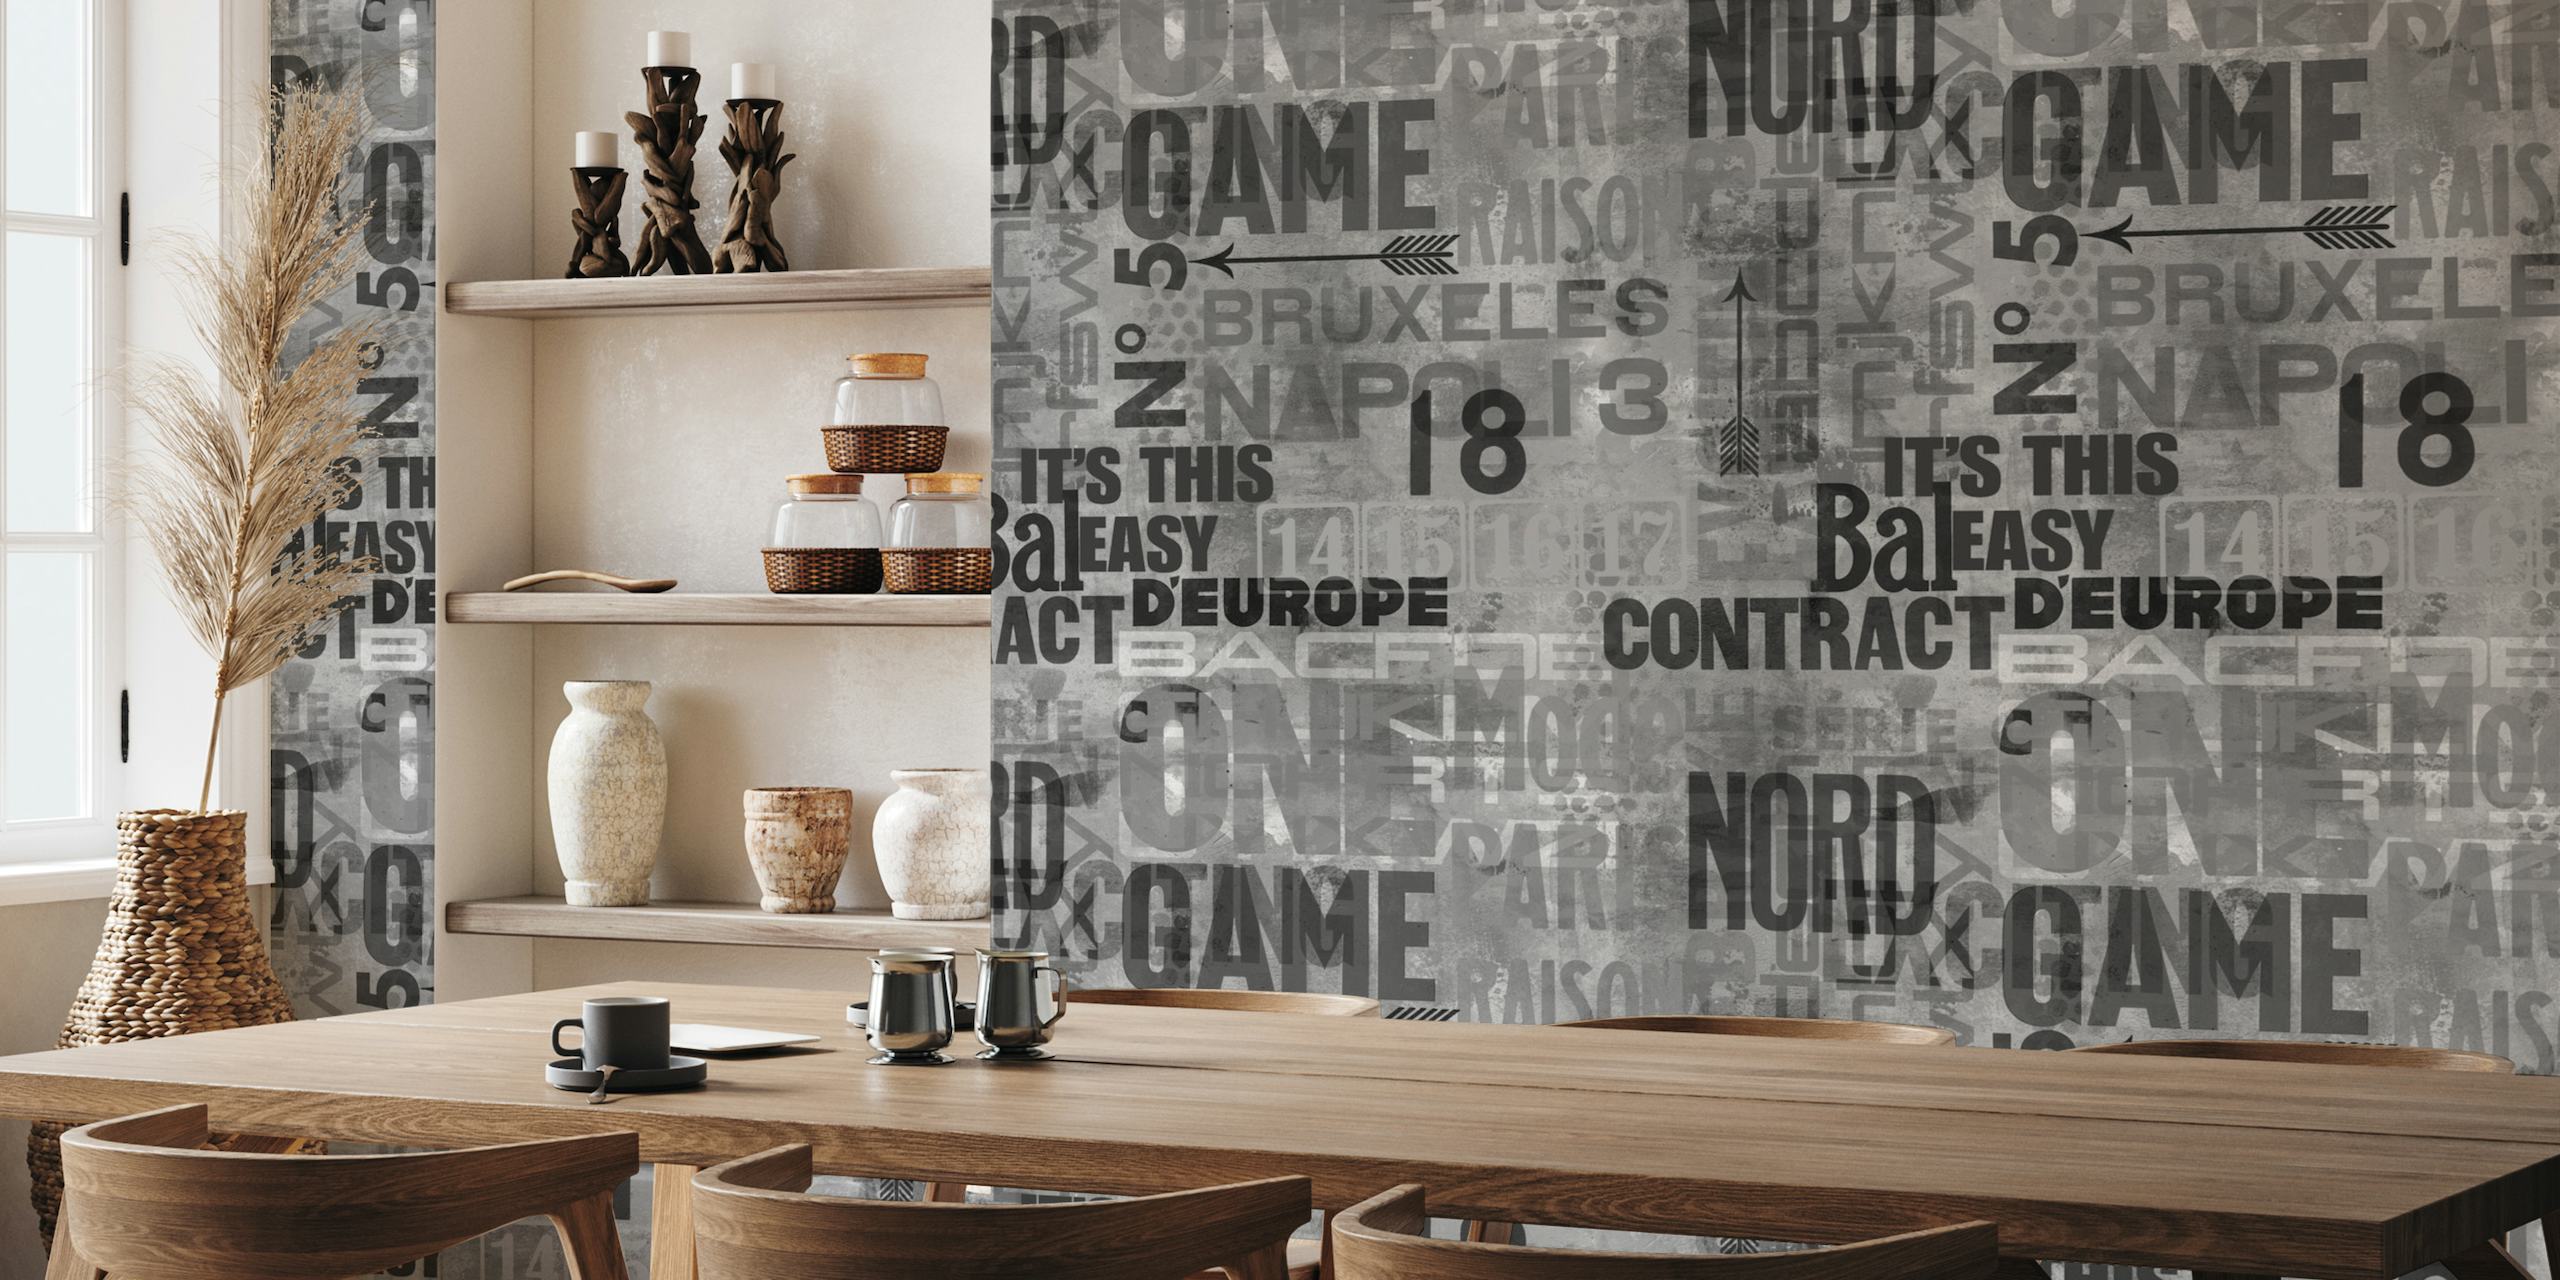 Black and white urban street art typography wall mural with overlapping text and numbers